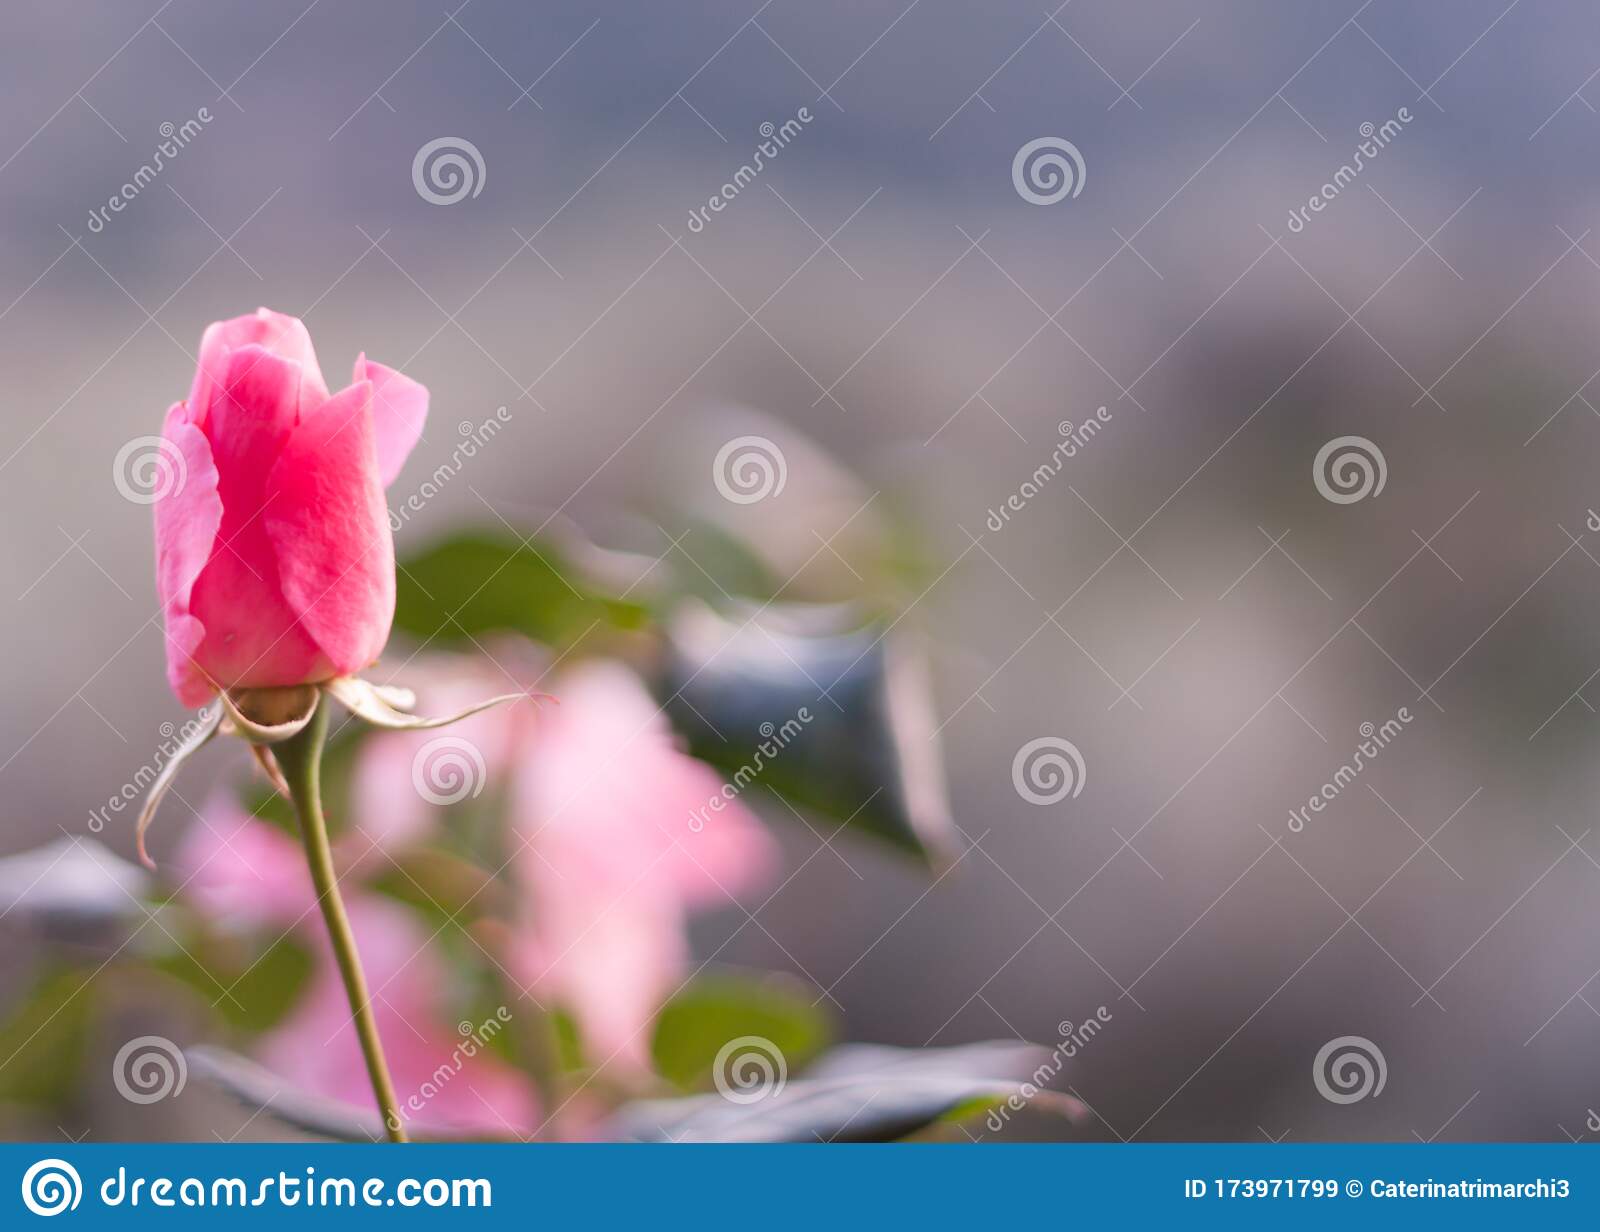 Delicate pink rosebud on blurred background fantasy foto for wallpaper and holliday card with defocus foreground stock image